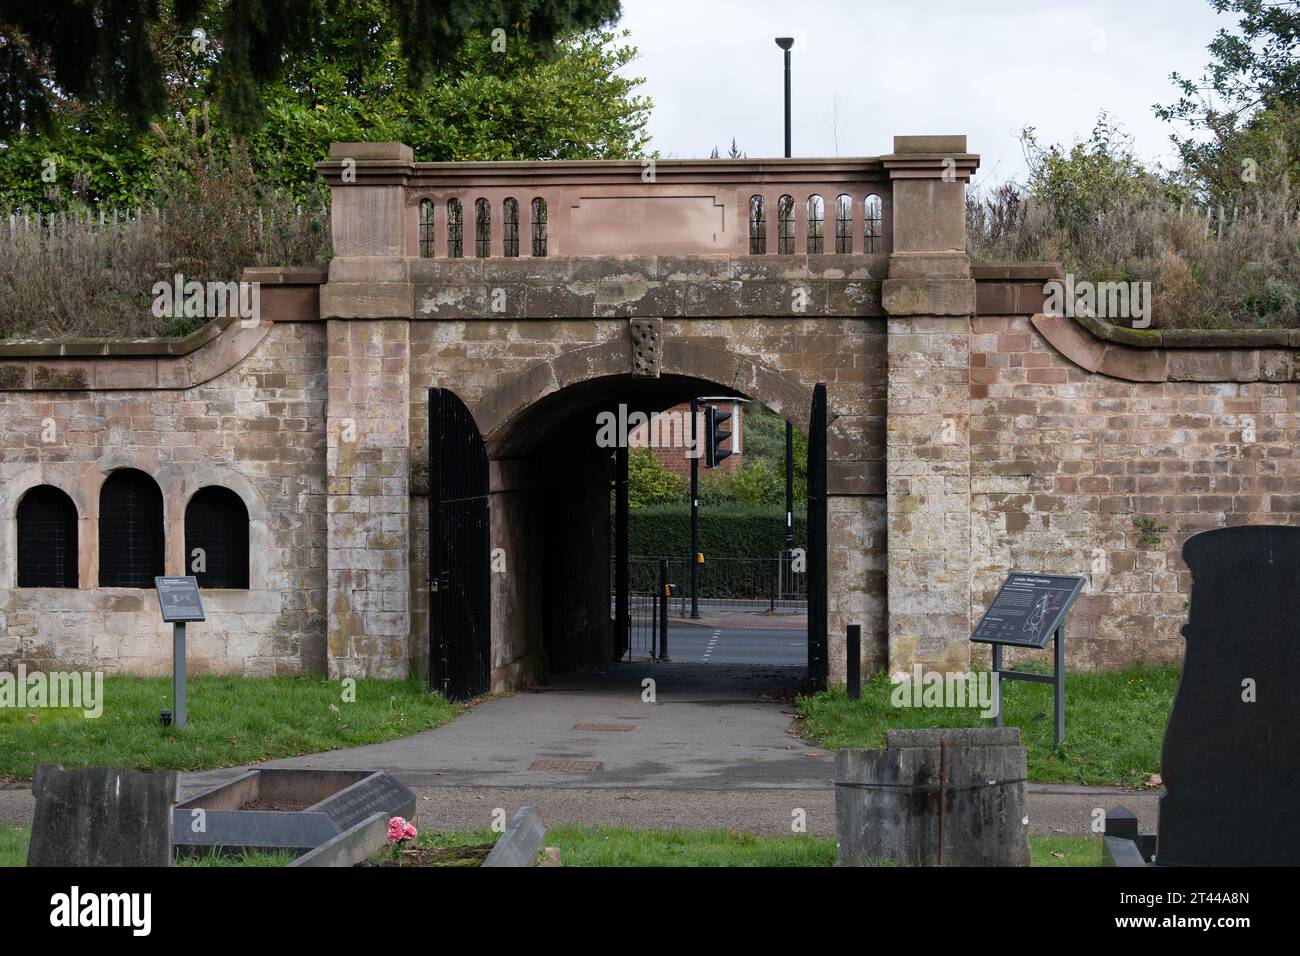 Der Fahrbahntunnel, London Road Cemetery, Coventry, West Midlands, England, UK Stockfoto